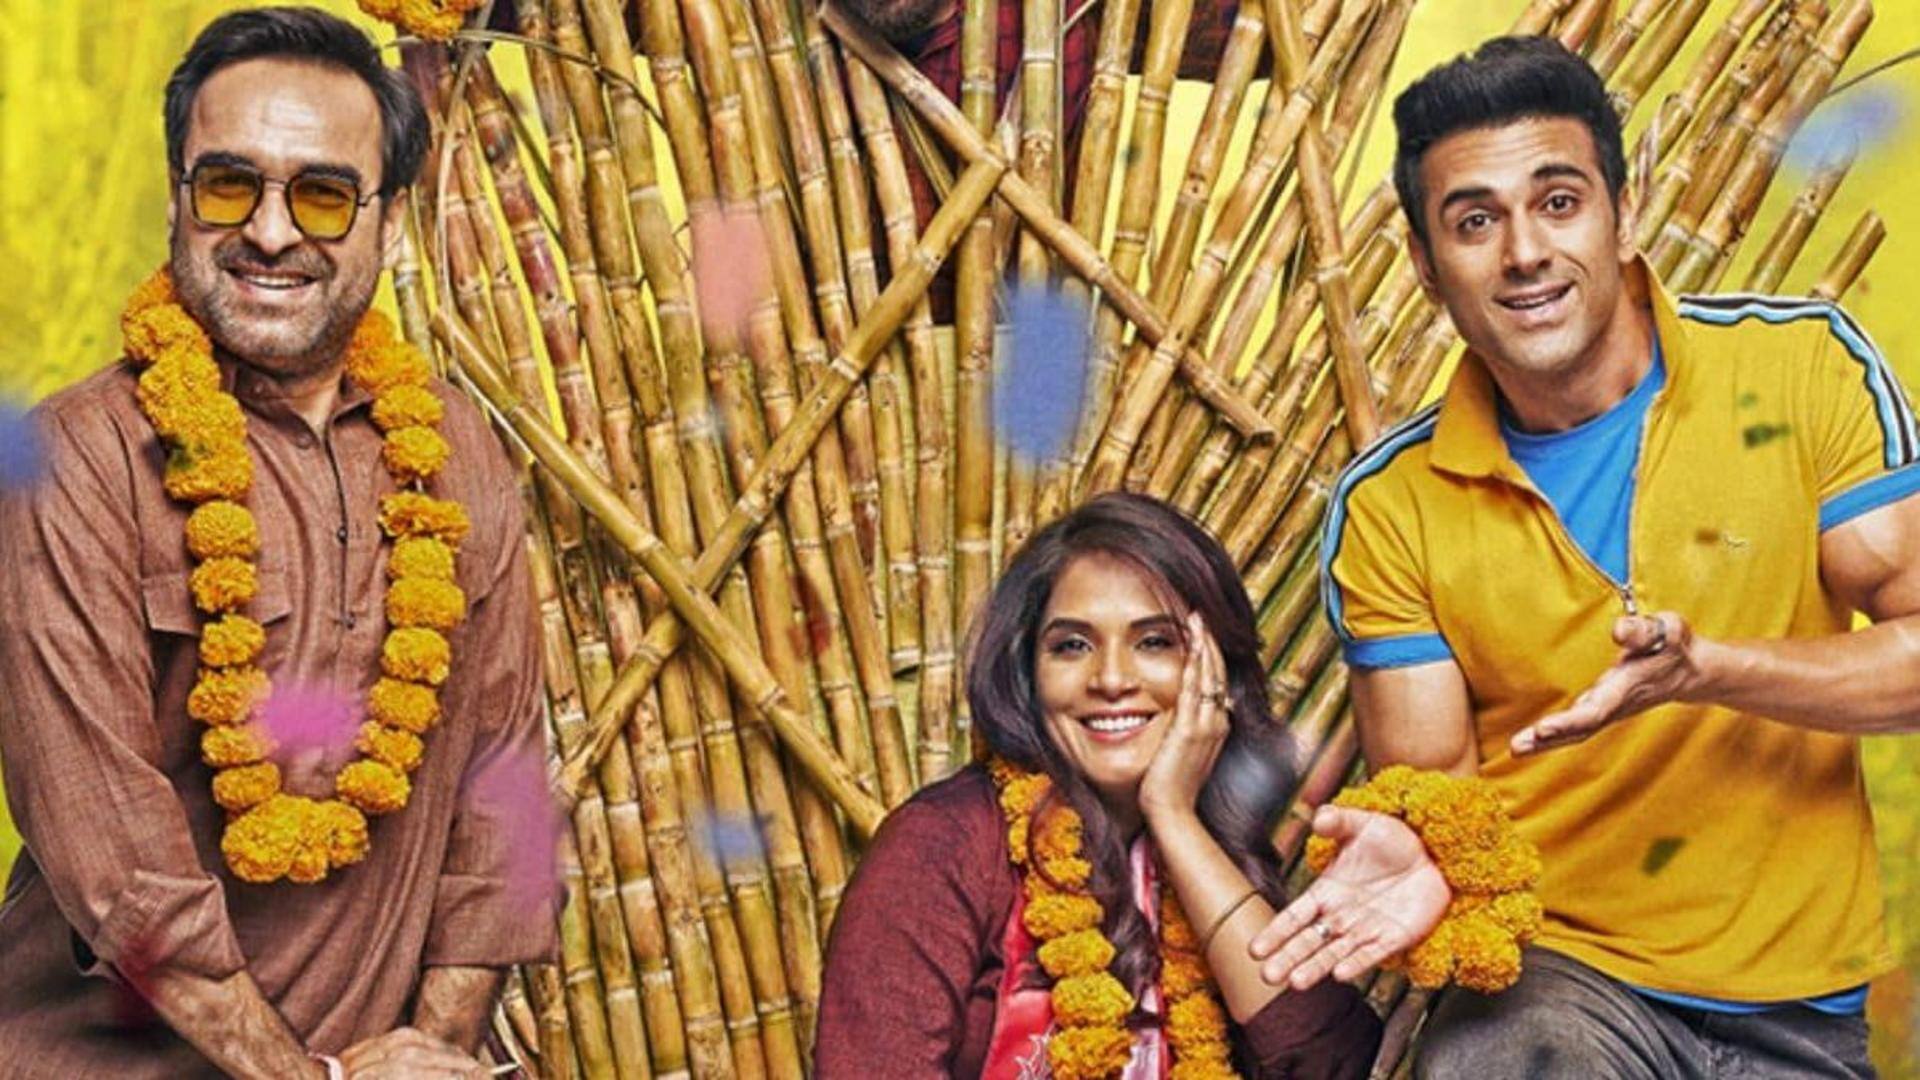 Box office: 'Fukrey 3' hits double digits on first Saturday